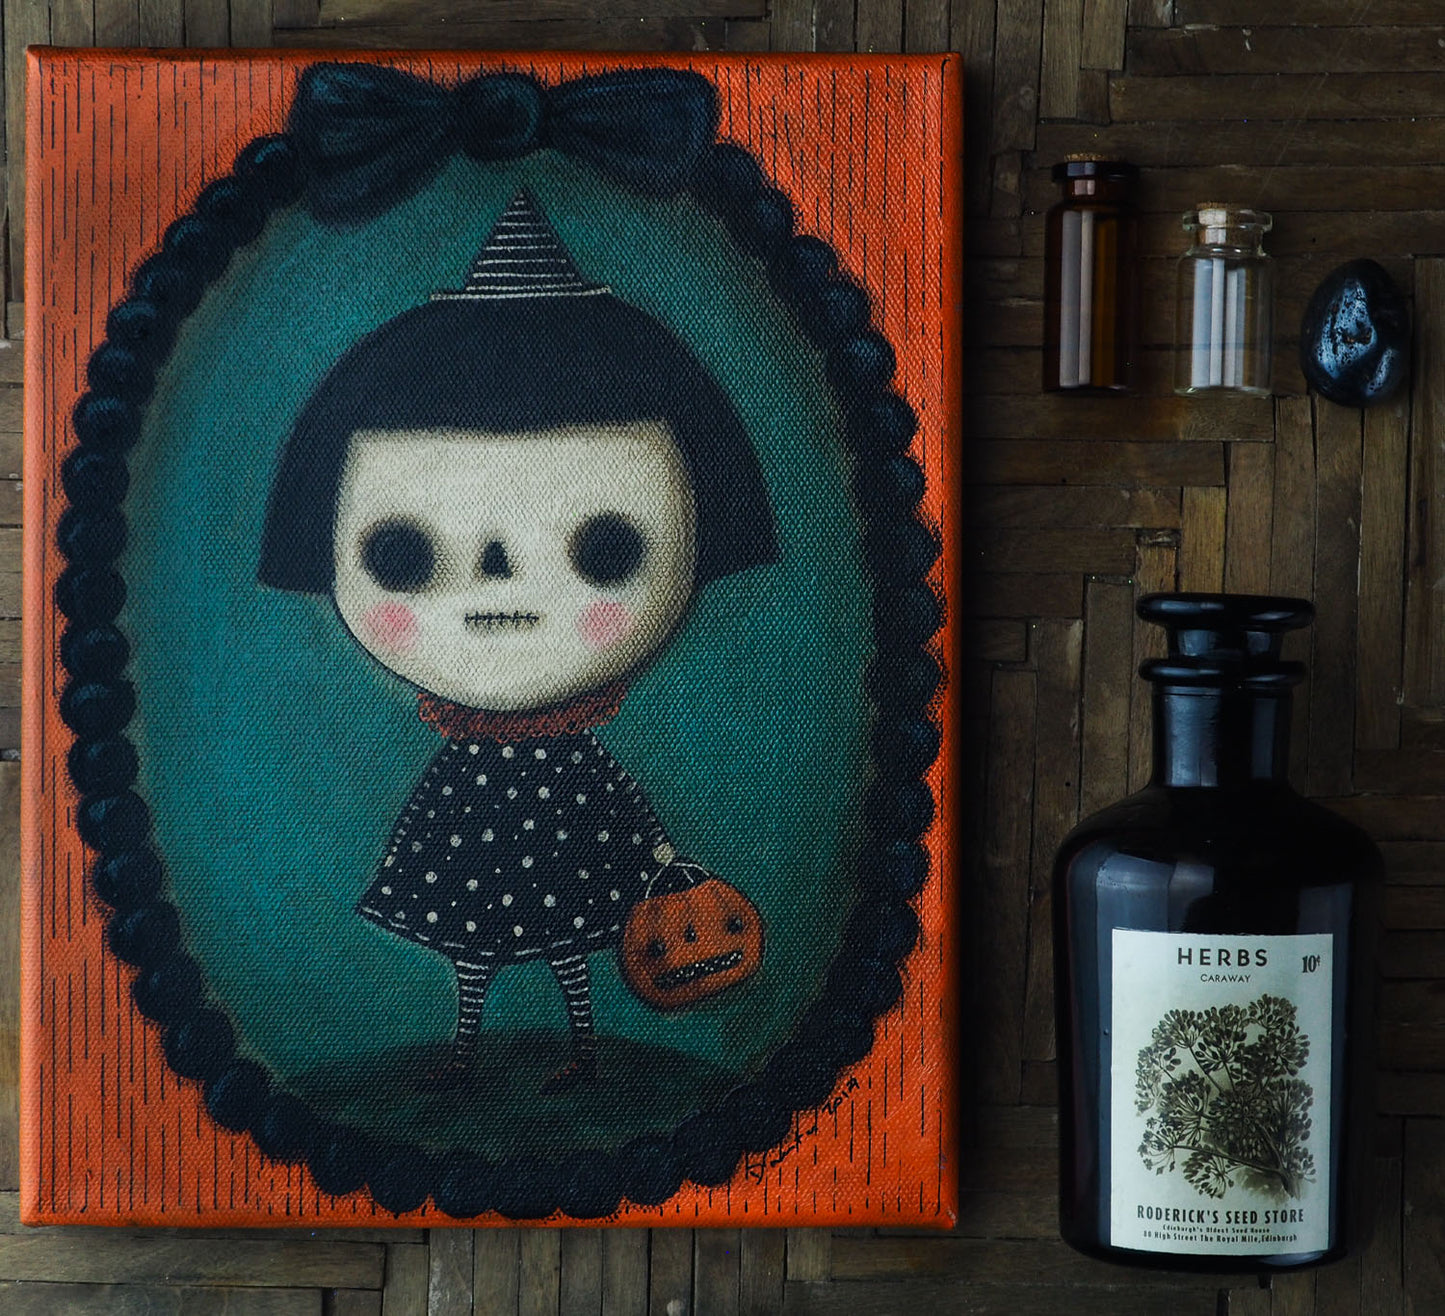 Original painting by Danita Art. Mixed media art using acrylics, oils, pastels, graphite and color pencils for an amazing Halloween decoration to accent your home decor.